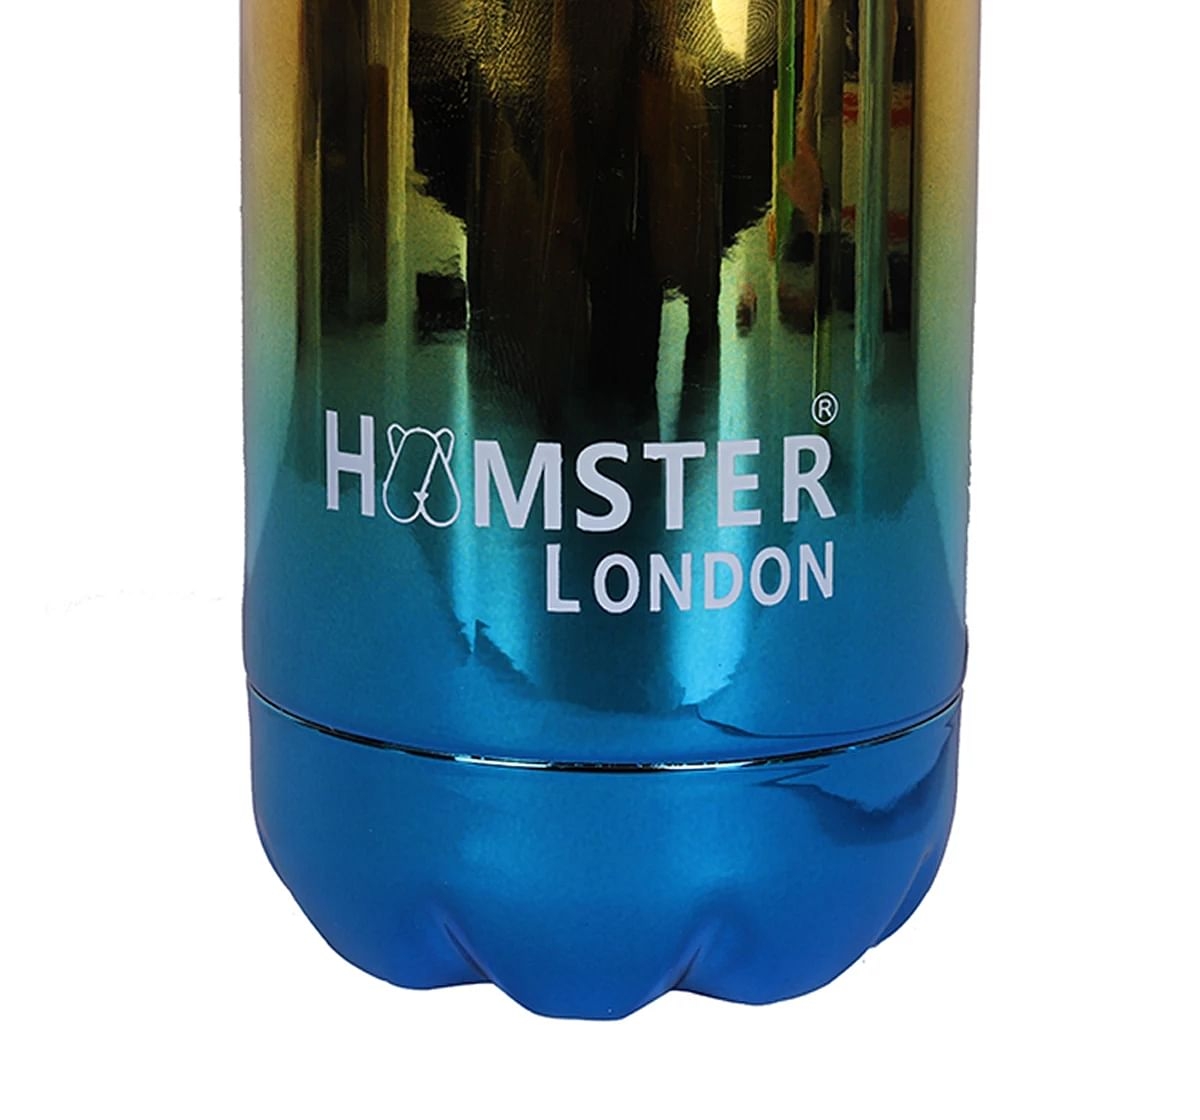 Stainless Steel Insulated Water Bottle by Hamster London for Kids, Multicolour, Non-Toxic, BPA Free, 750ml, 5Y+